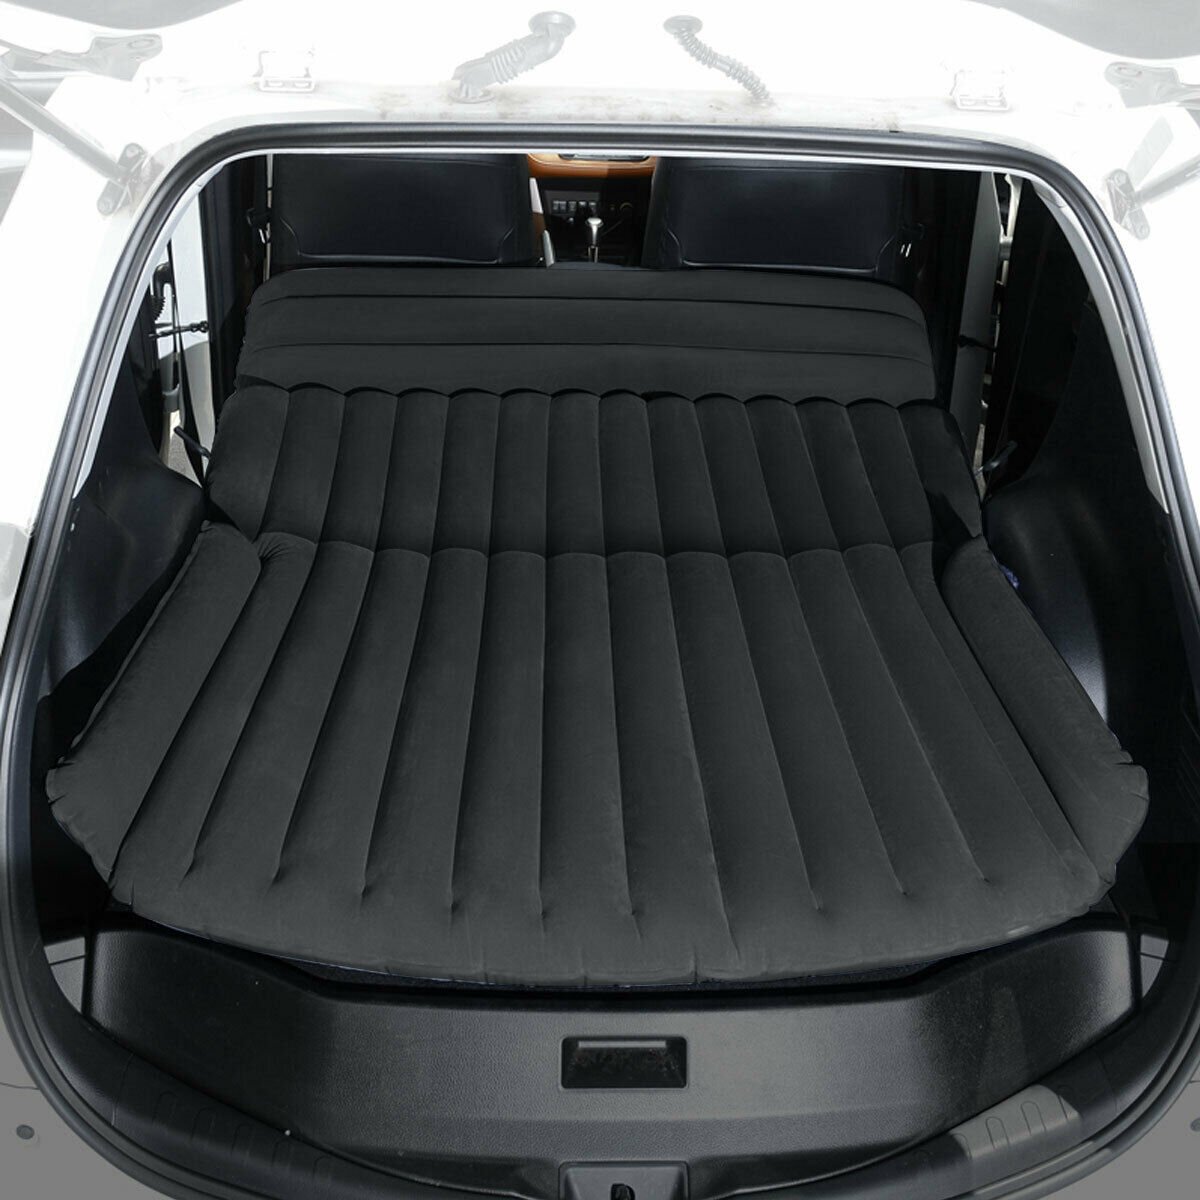 Inflatable SUV Air Backseat Mattress Flocking Travel Pad W/Pump Camping Outdoor